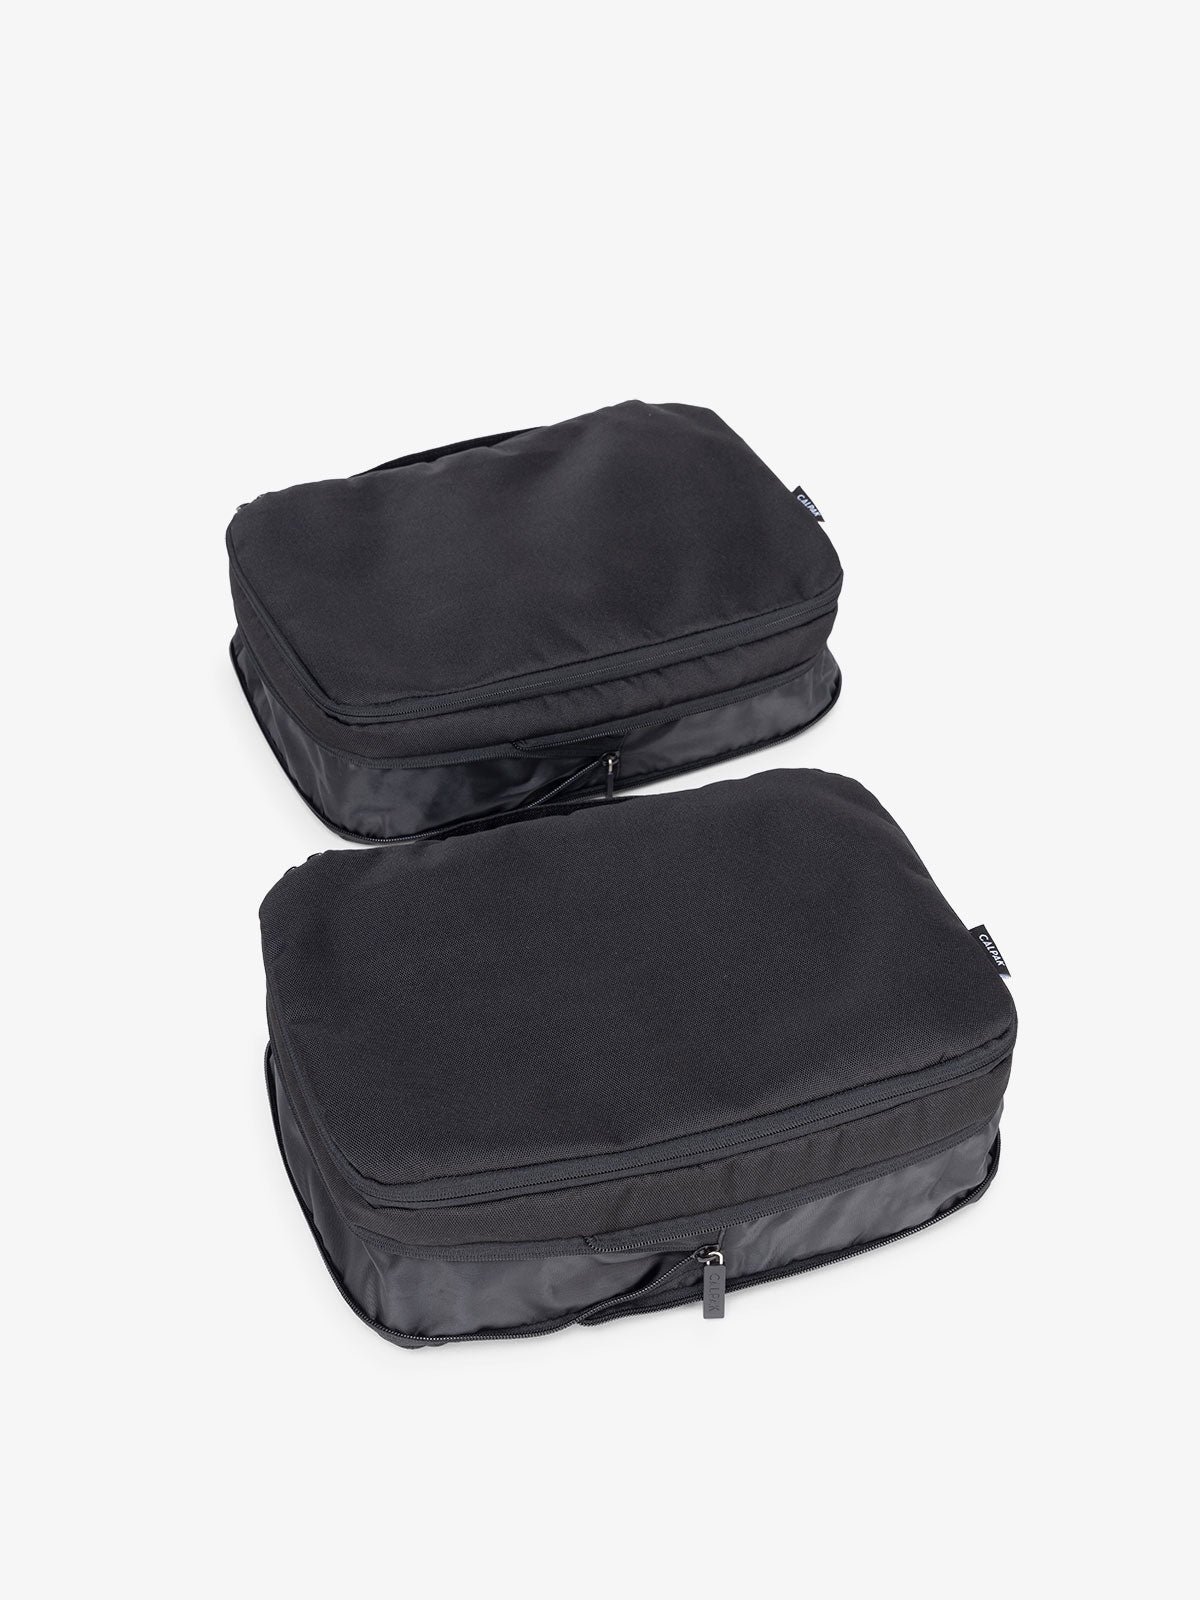 travel packing compression cubes